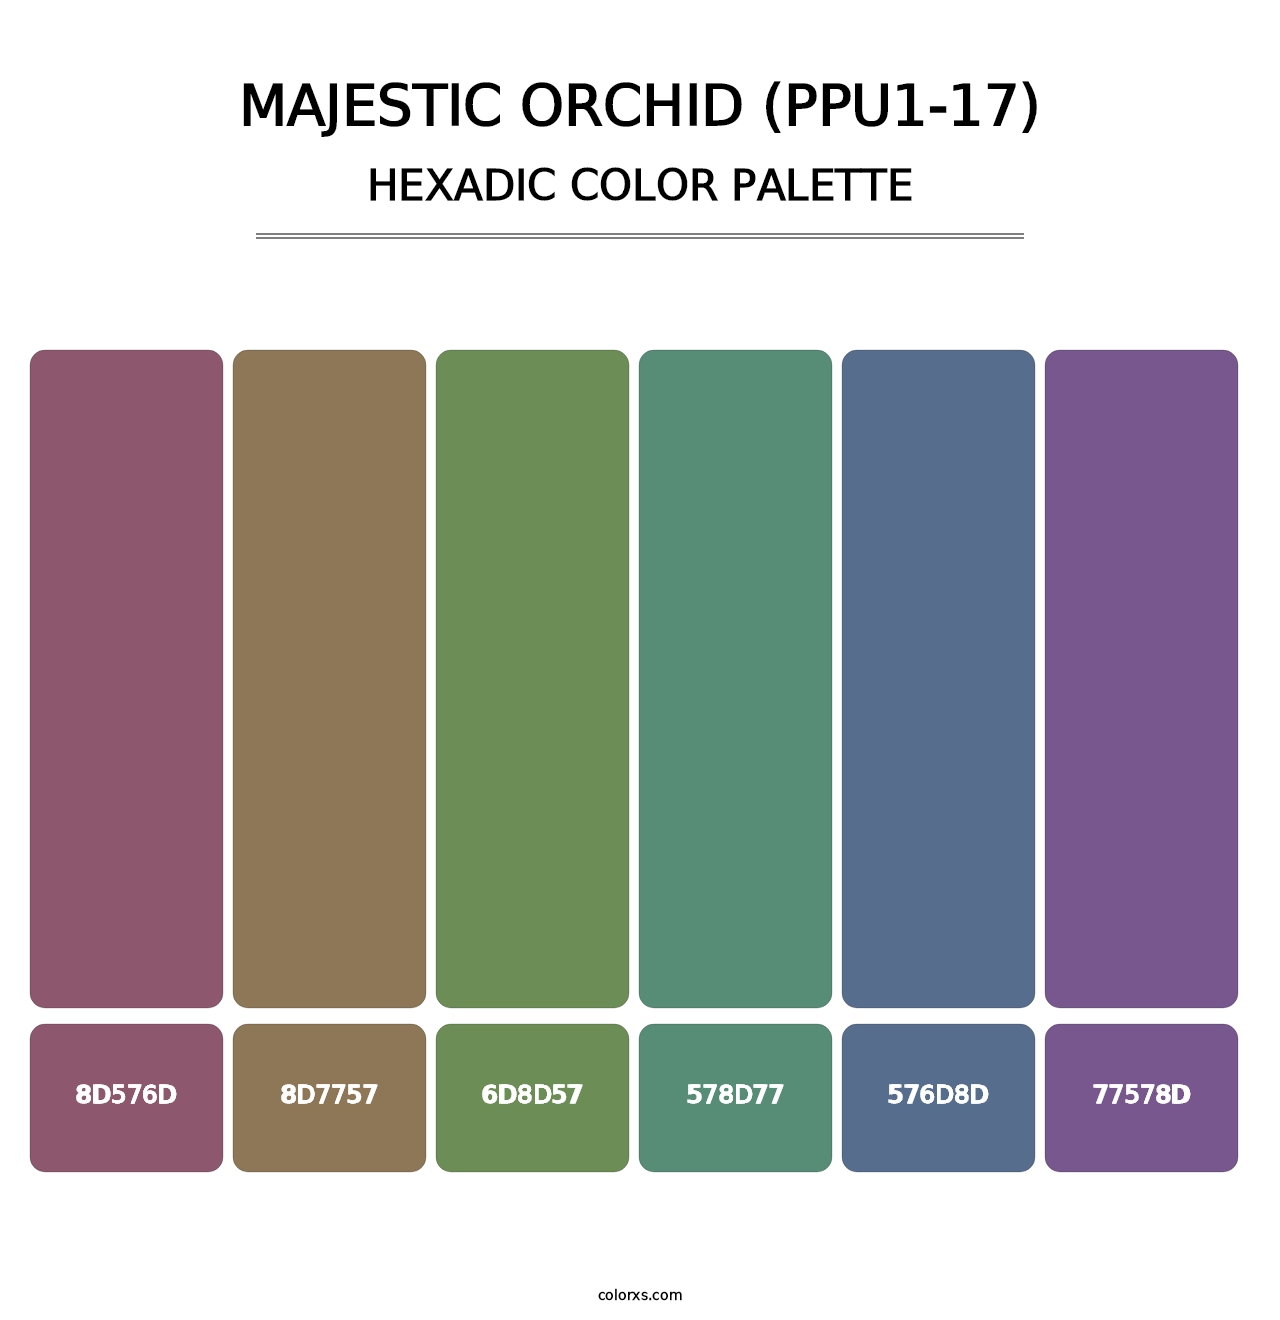 Majestic Orchid (PPU1-17) - Hexadic Color Palette